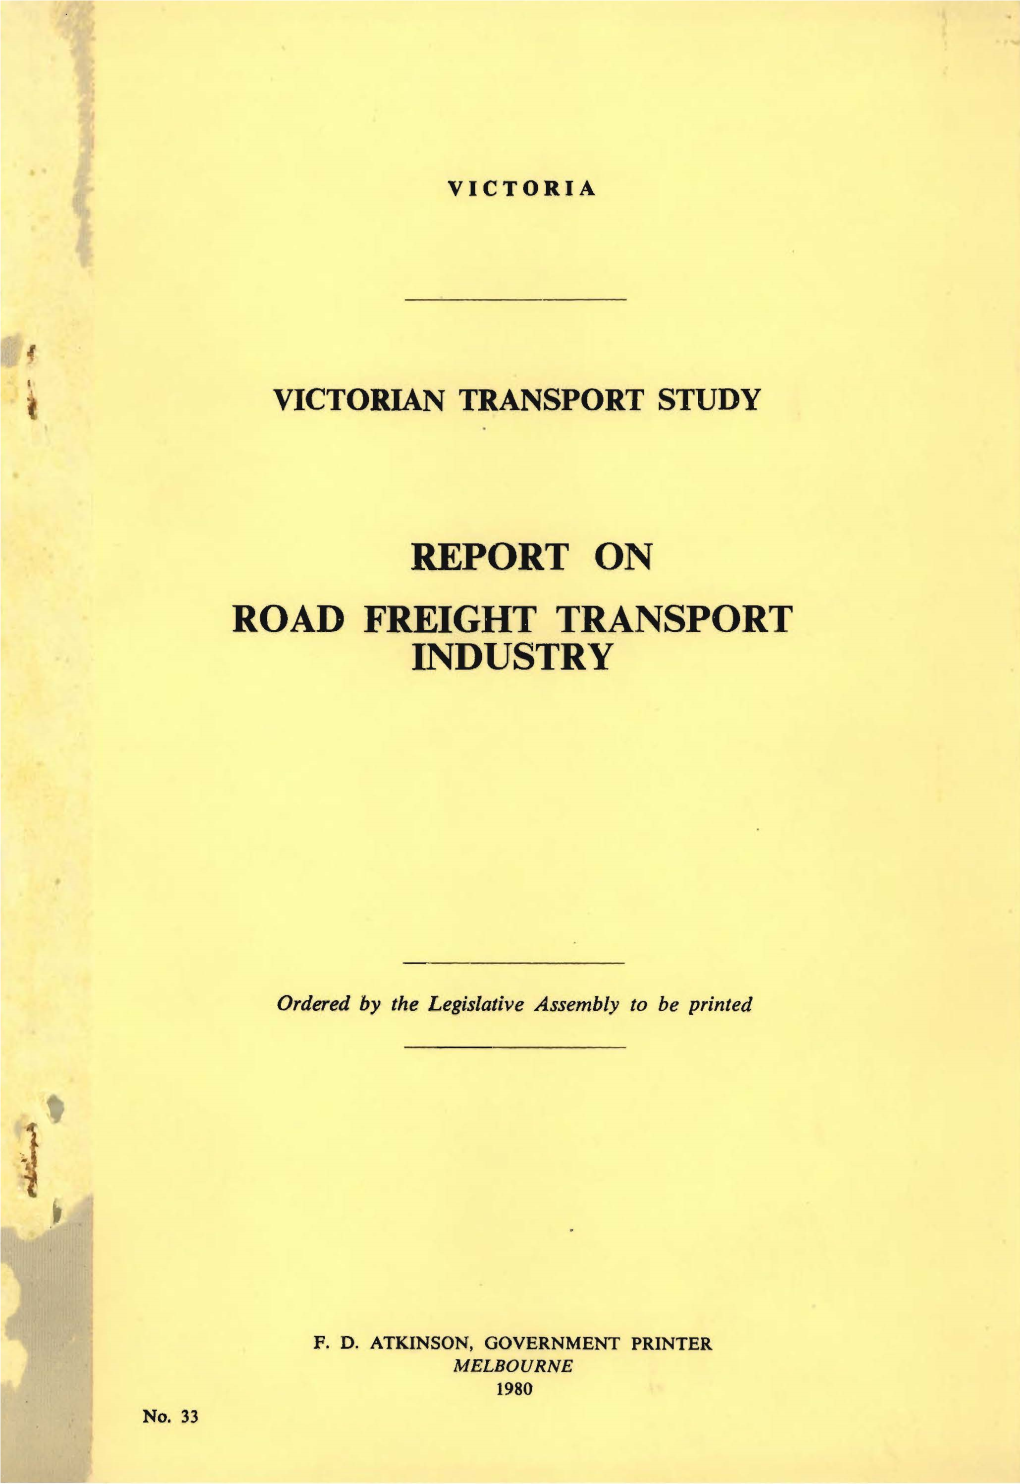 Report on Road Freight Transport Industry